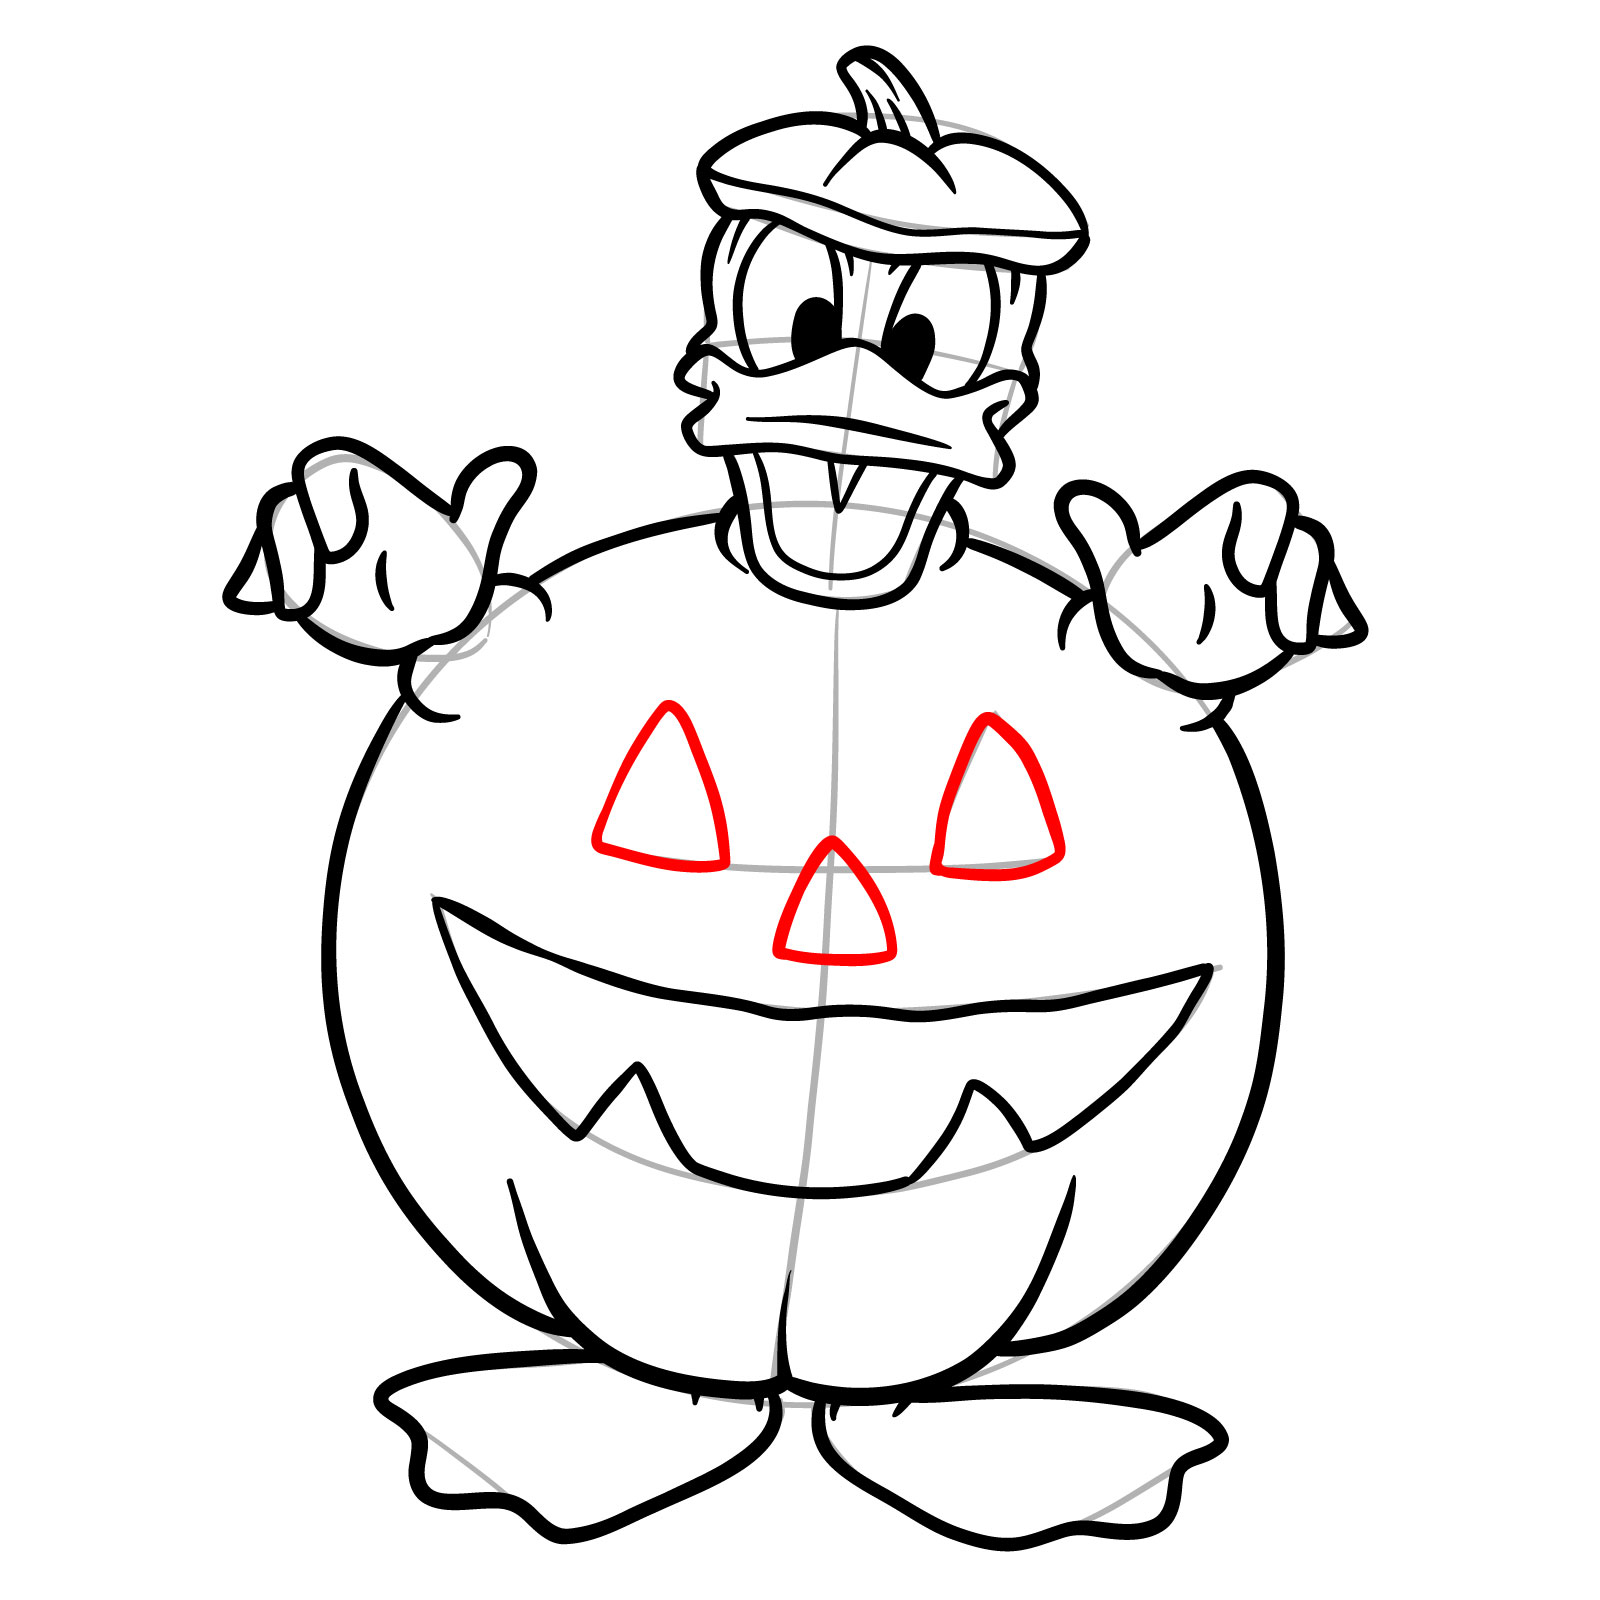 How to draw Halloween Donald Duck in a jack o'lantern - step 22